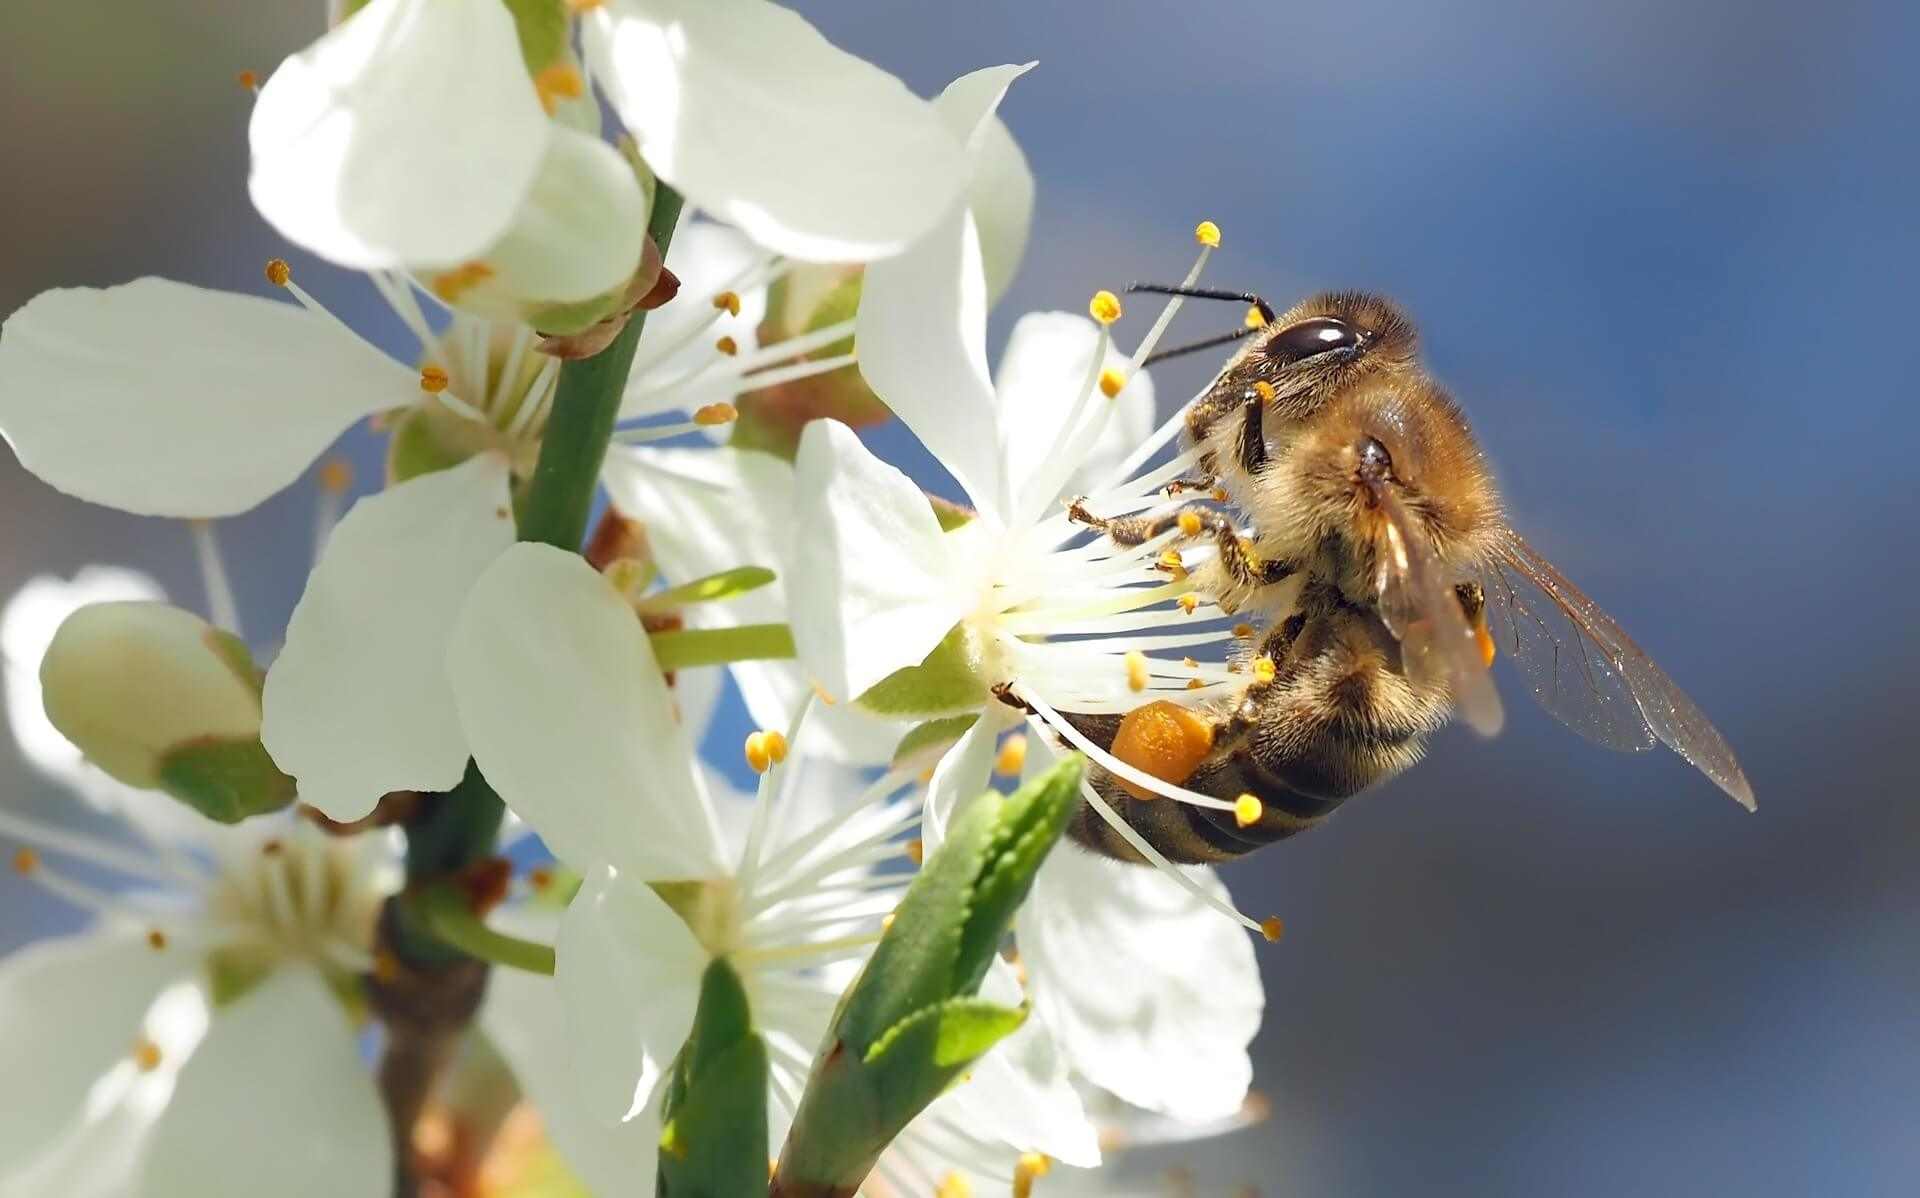 Avoiding Bees and Preventing Bee Stings